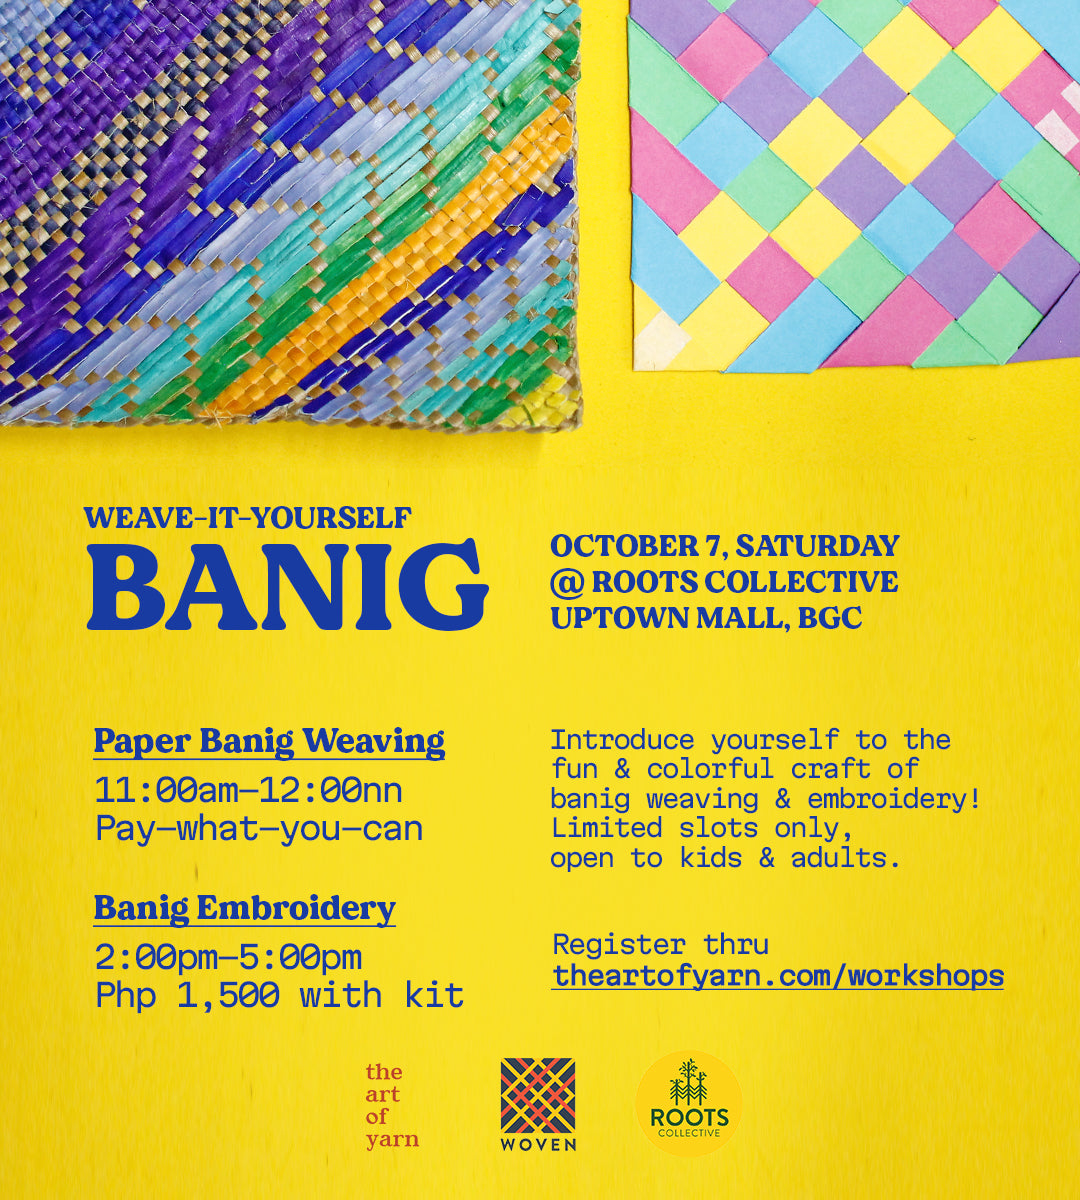 [Oct 7, 2pm] Banig Embroidery Workshop at Roots Collective, BGC